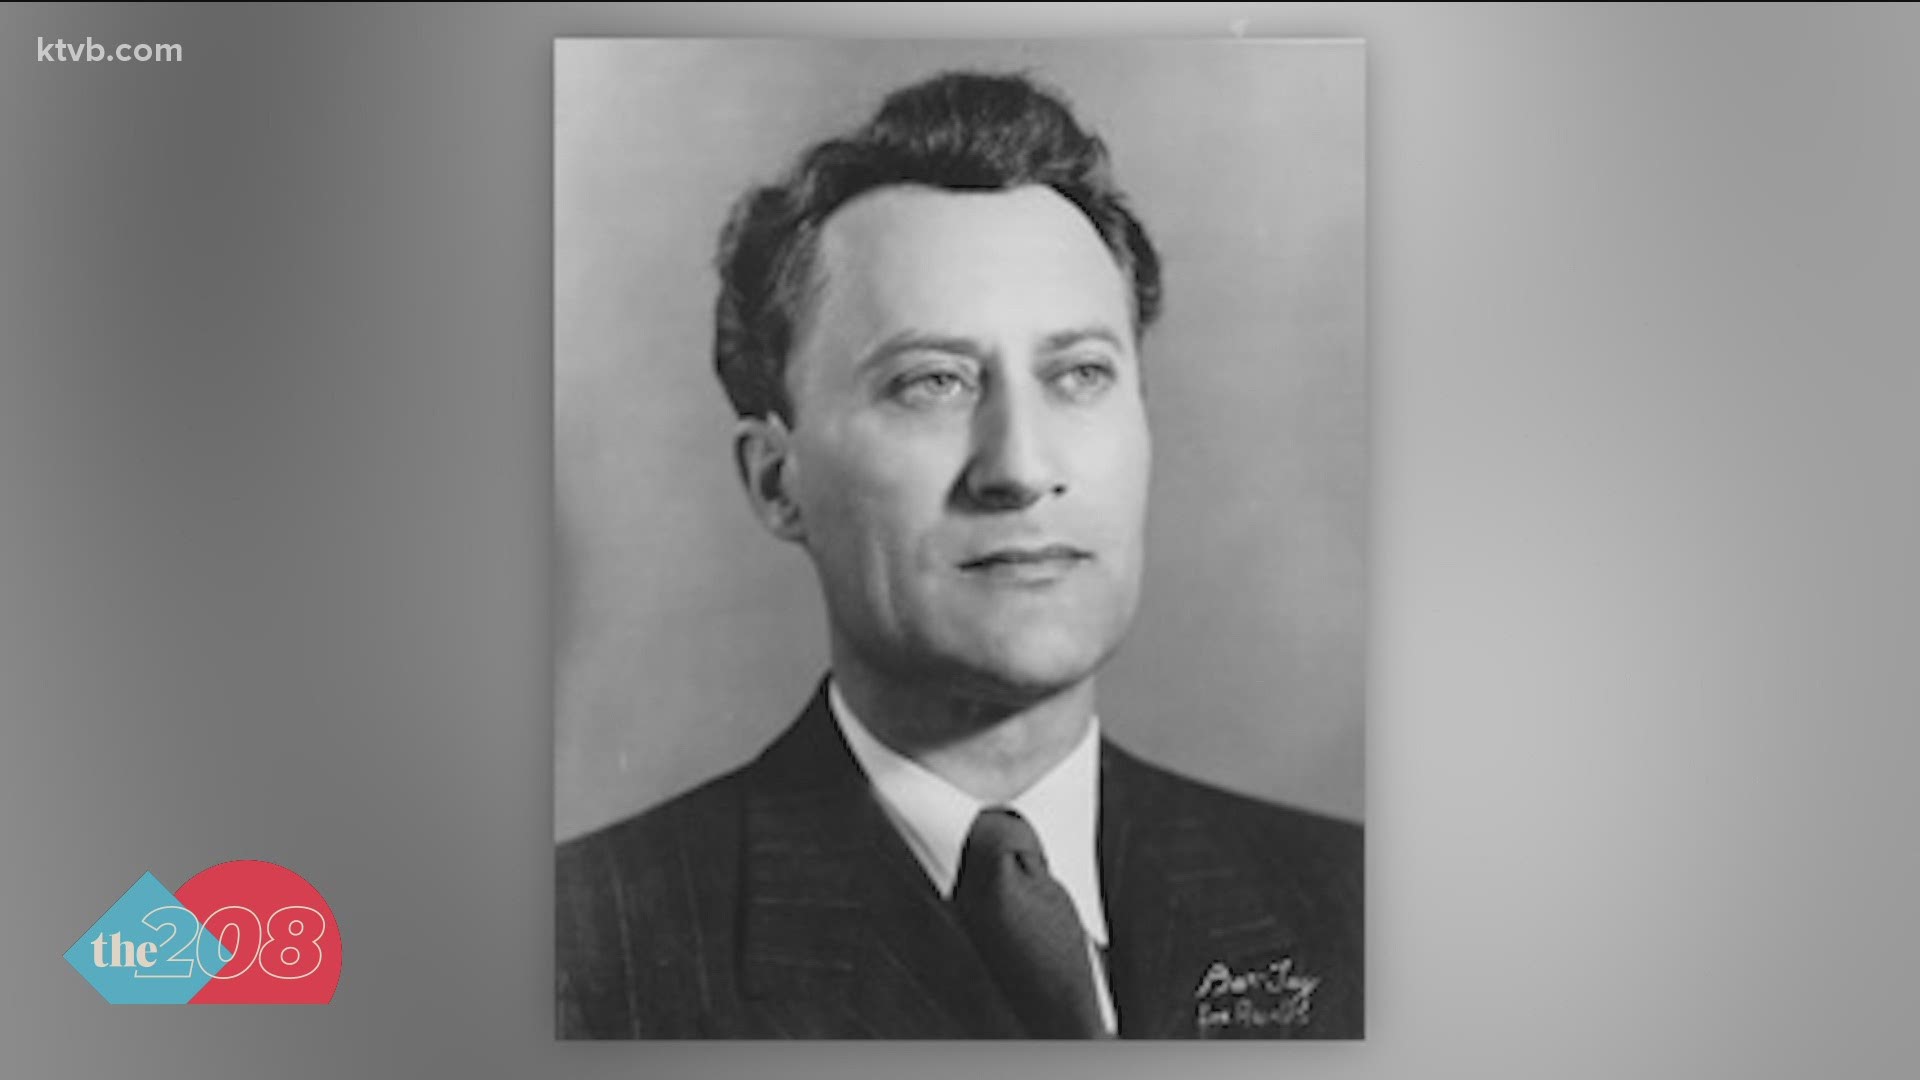 On May 1, 1948, Sen. Glen Taylor was set to speak at a Black Youth Rally in Birmingham, Ala. After using a 'Blacks only' entrance, he was arrested and put in jail.